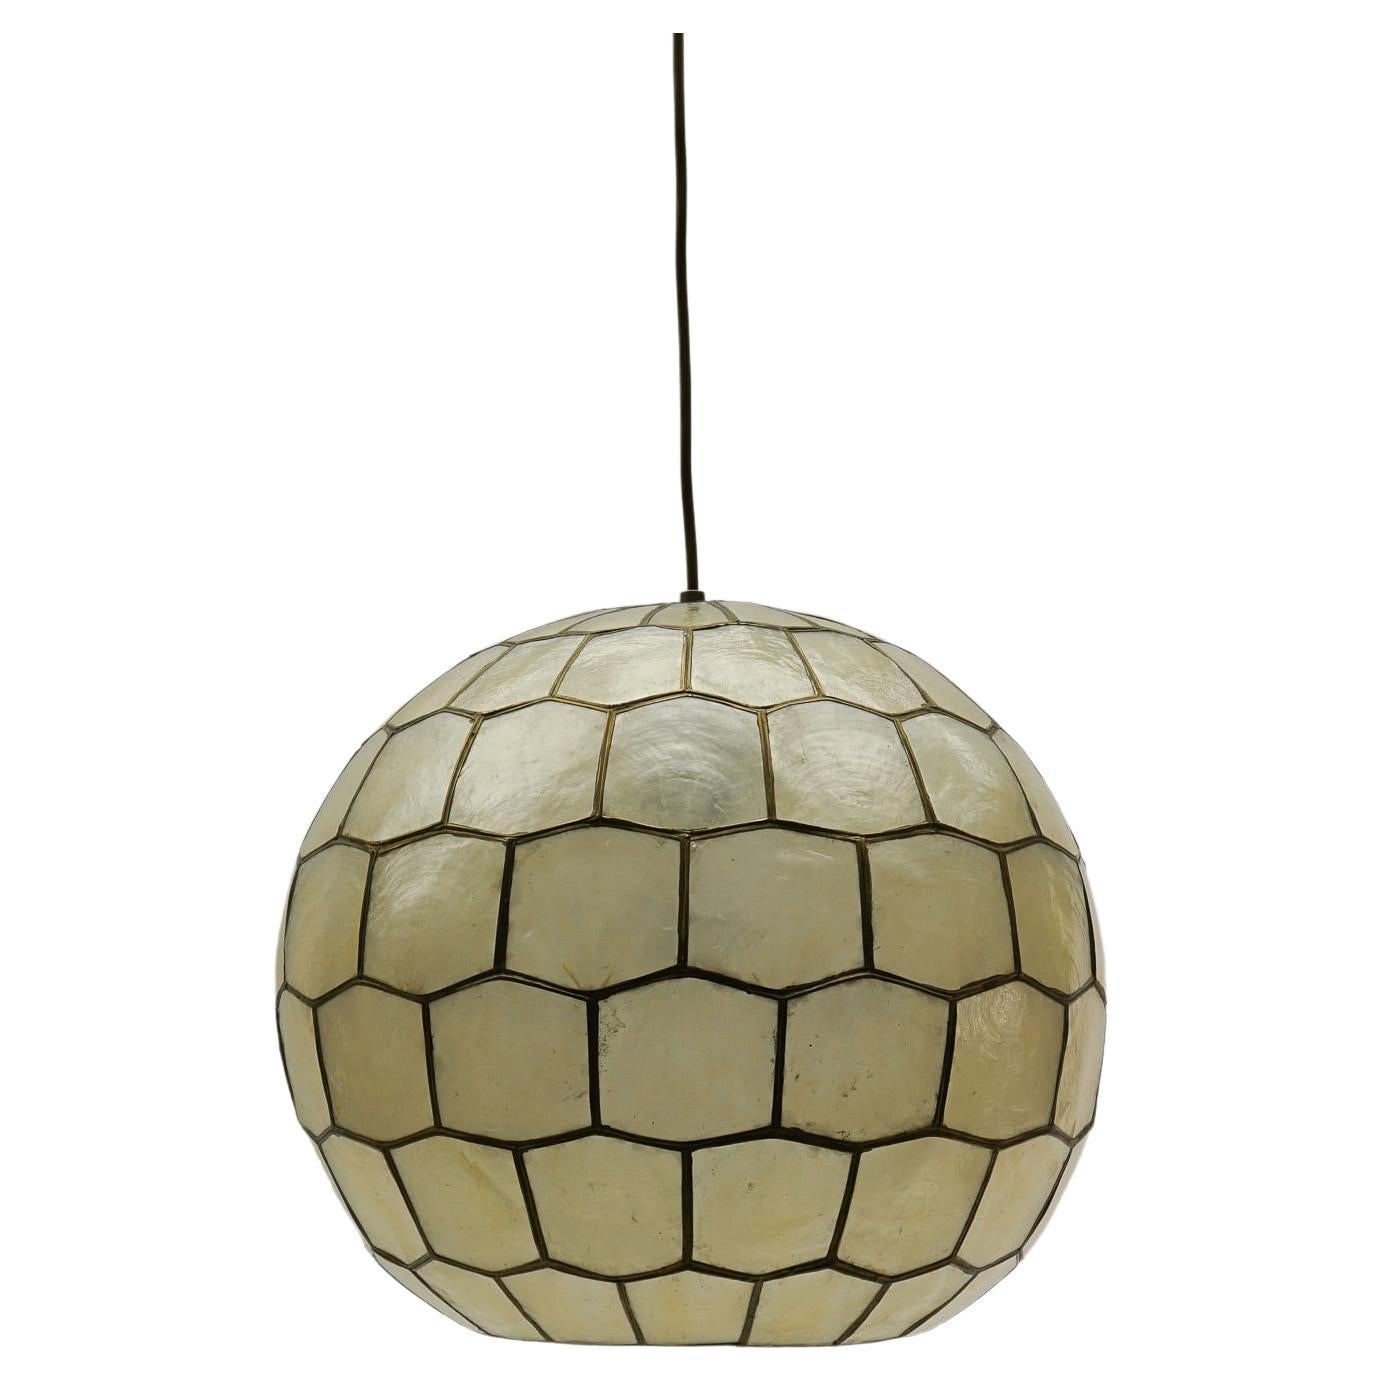 Lovely Mother-of-Pearl Ceiling Ball Lamp, 1960s For Sale